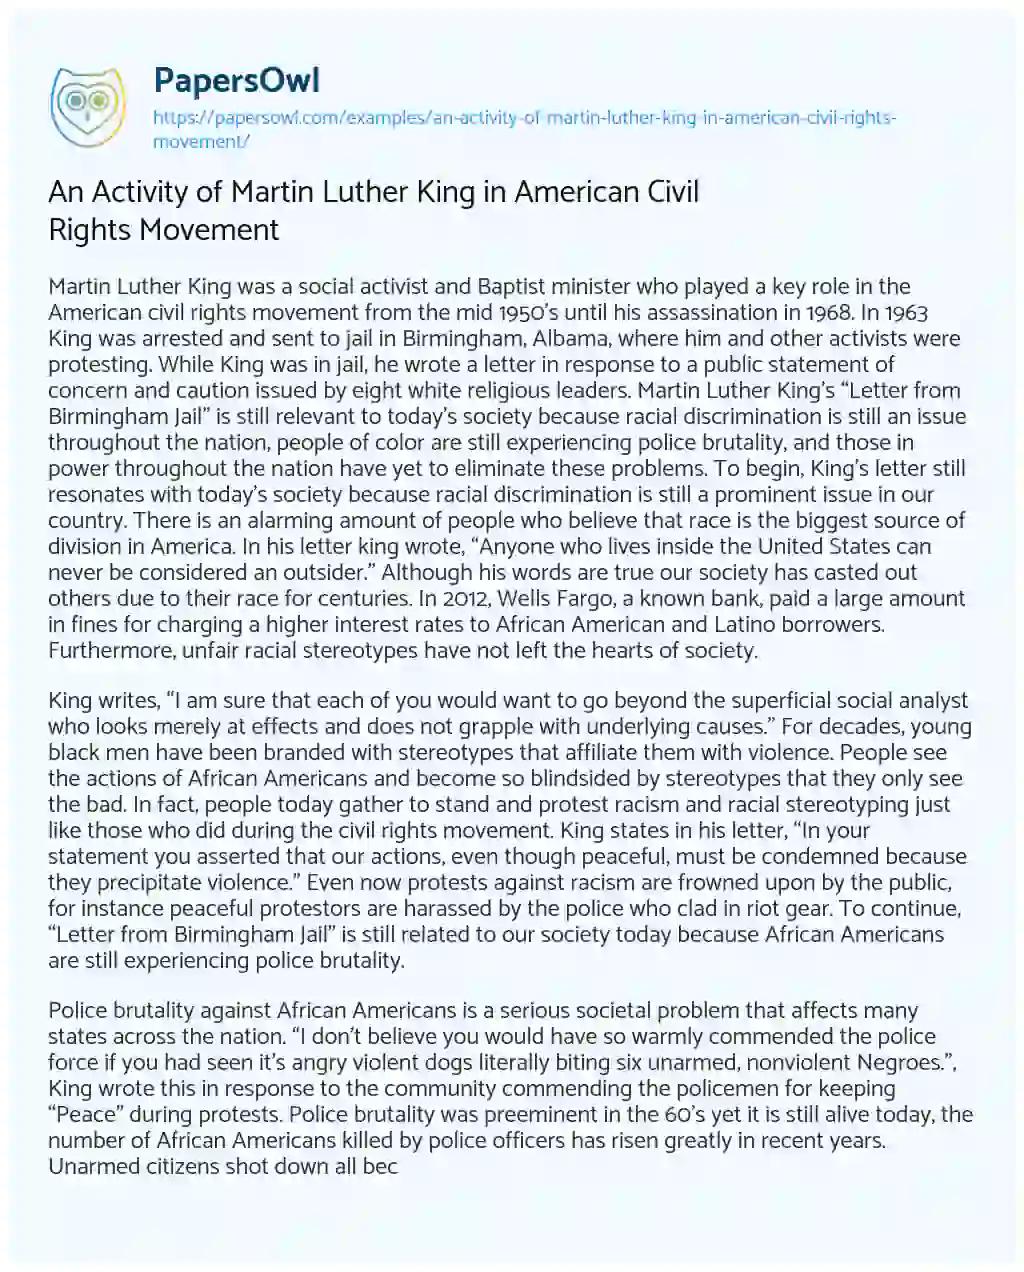 Essay on An Activity of Martin Luther King in American Civil Rights Movement